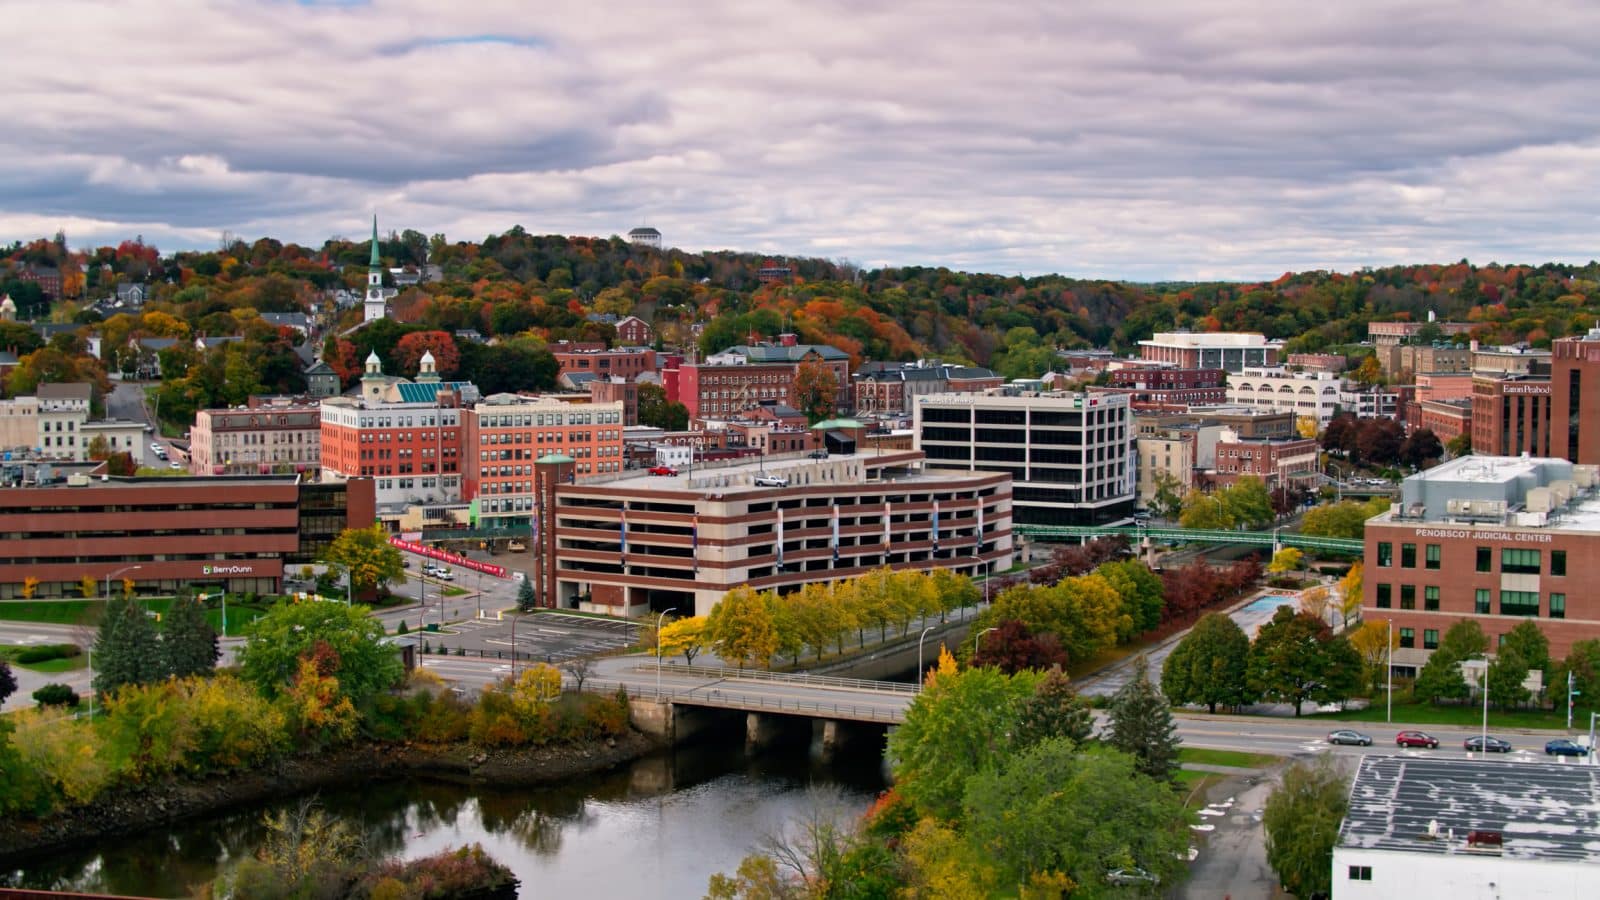 The city of Bangor, Maine, where Lowry & Associates injury law firm is located.